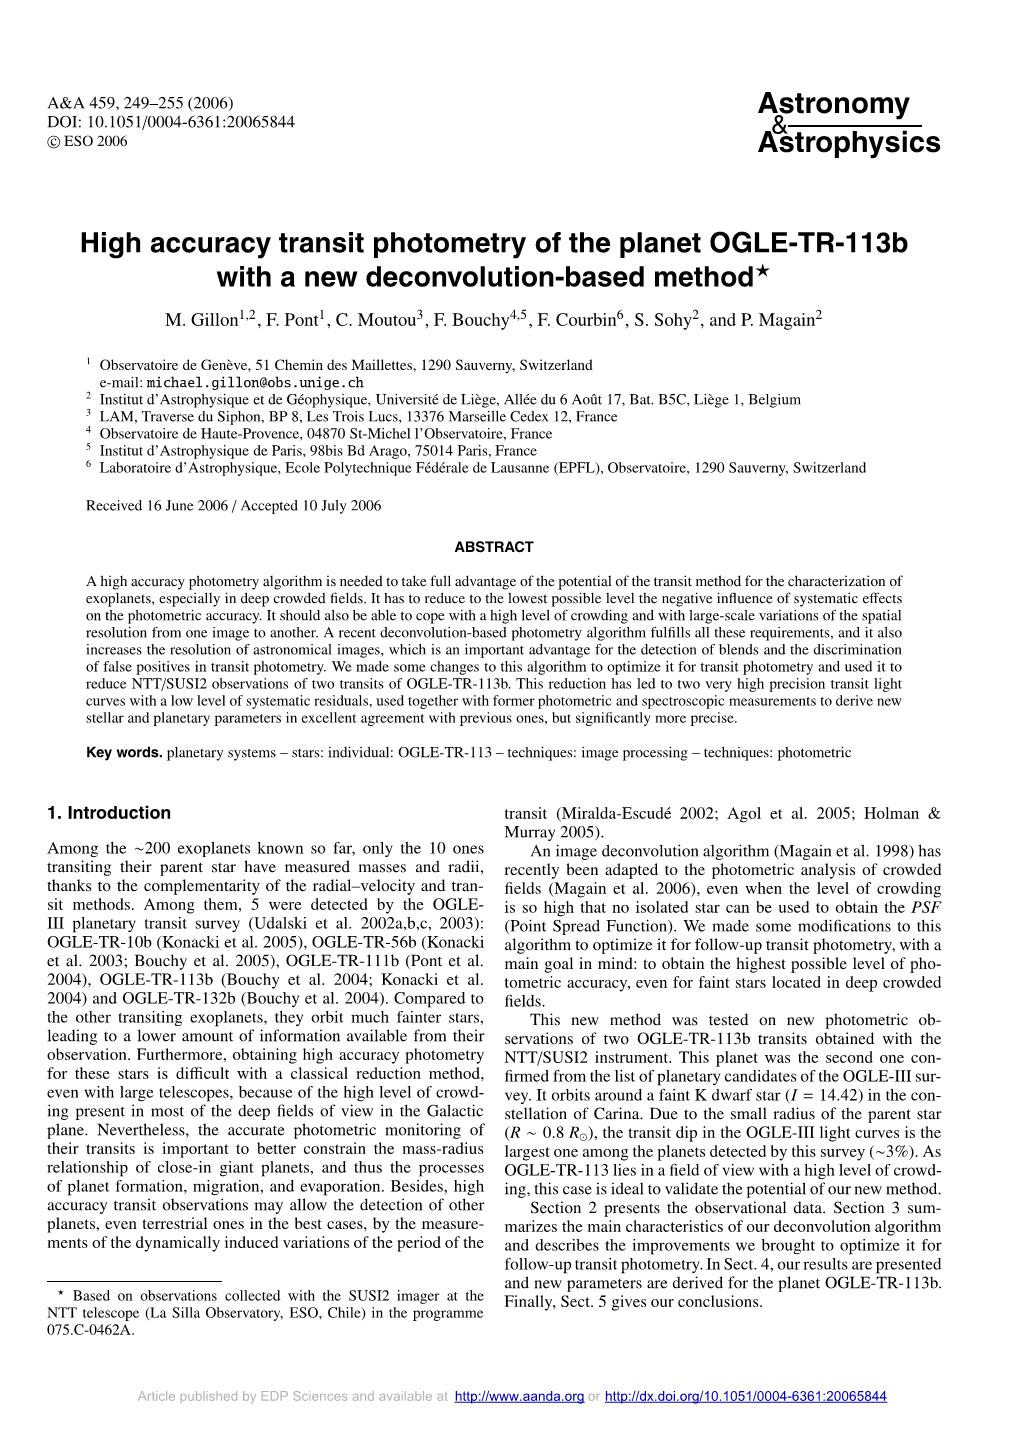 High Accuracy Transit Photometry of the Planet OGLE-TR-113B with a New Deconvolution-Based Method